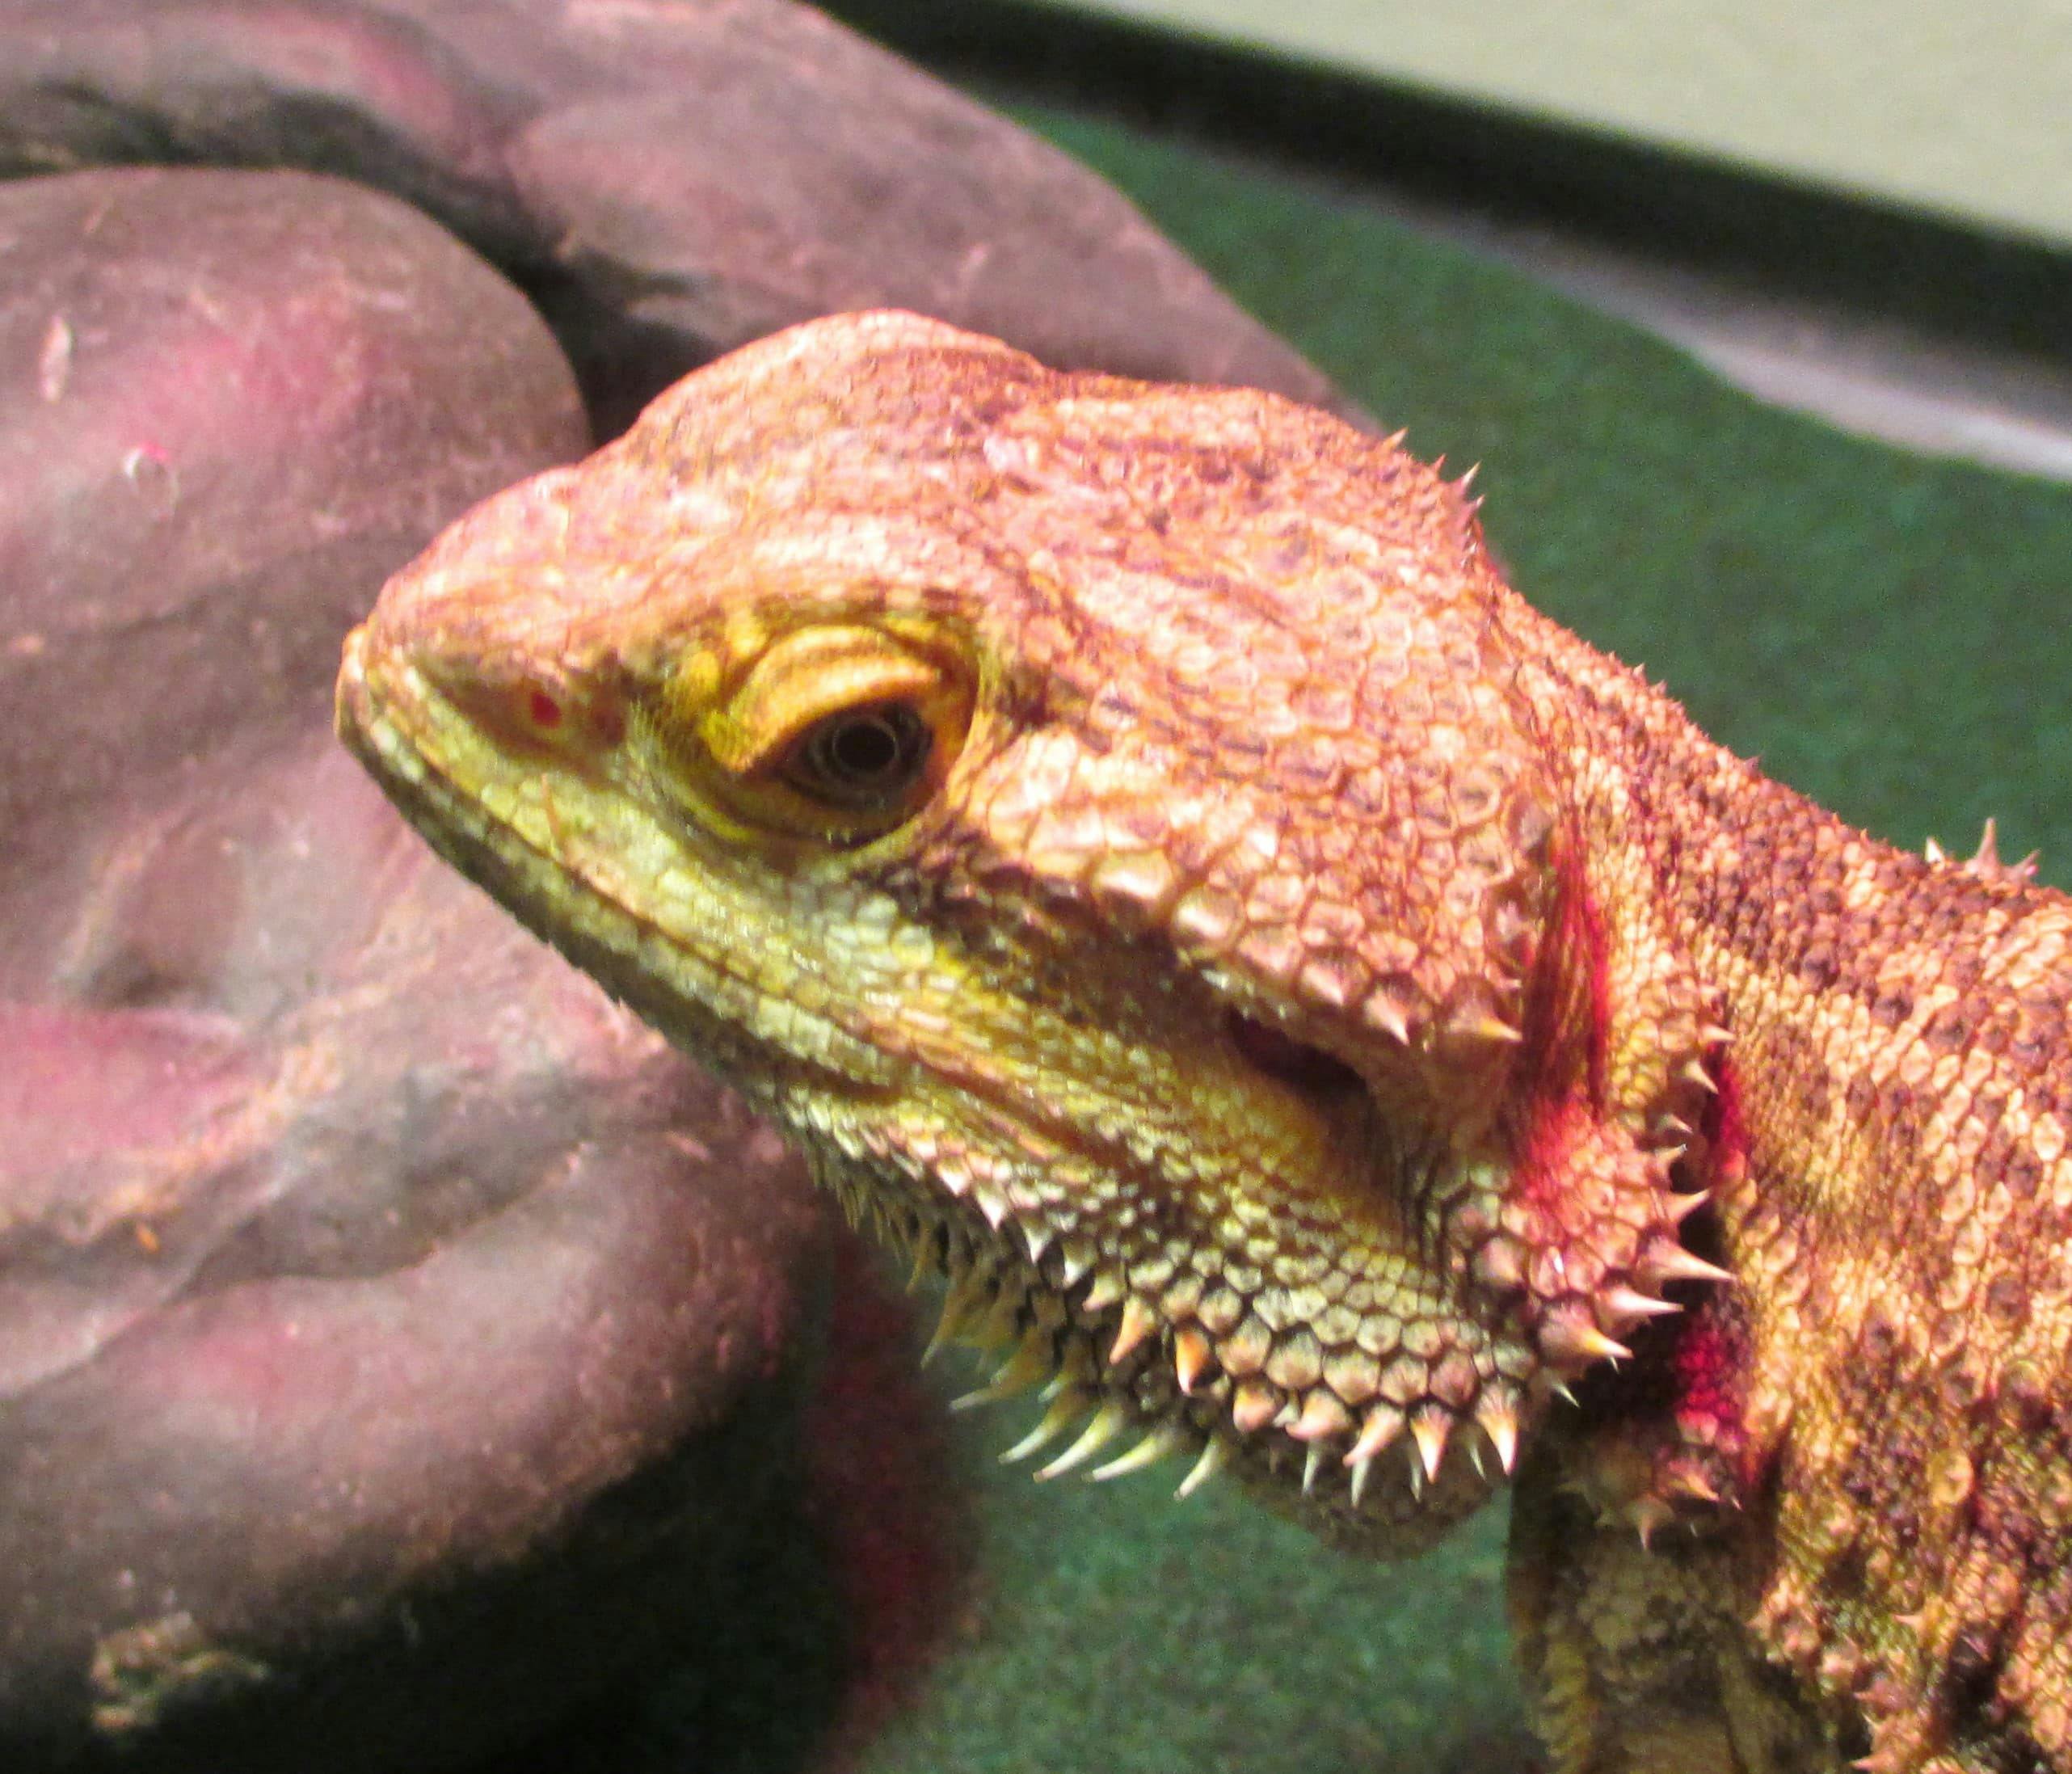 Normal, healthy bearded dragon. Photo provided by Moichor.